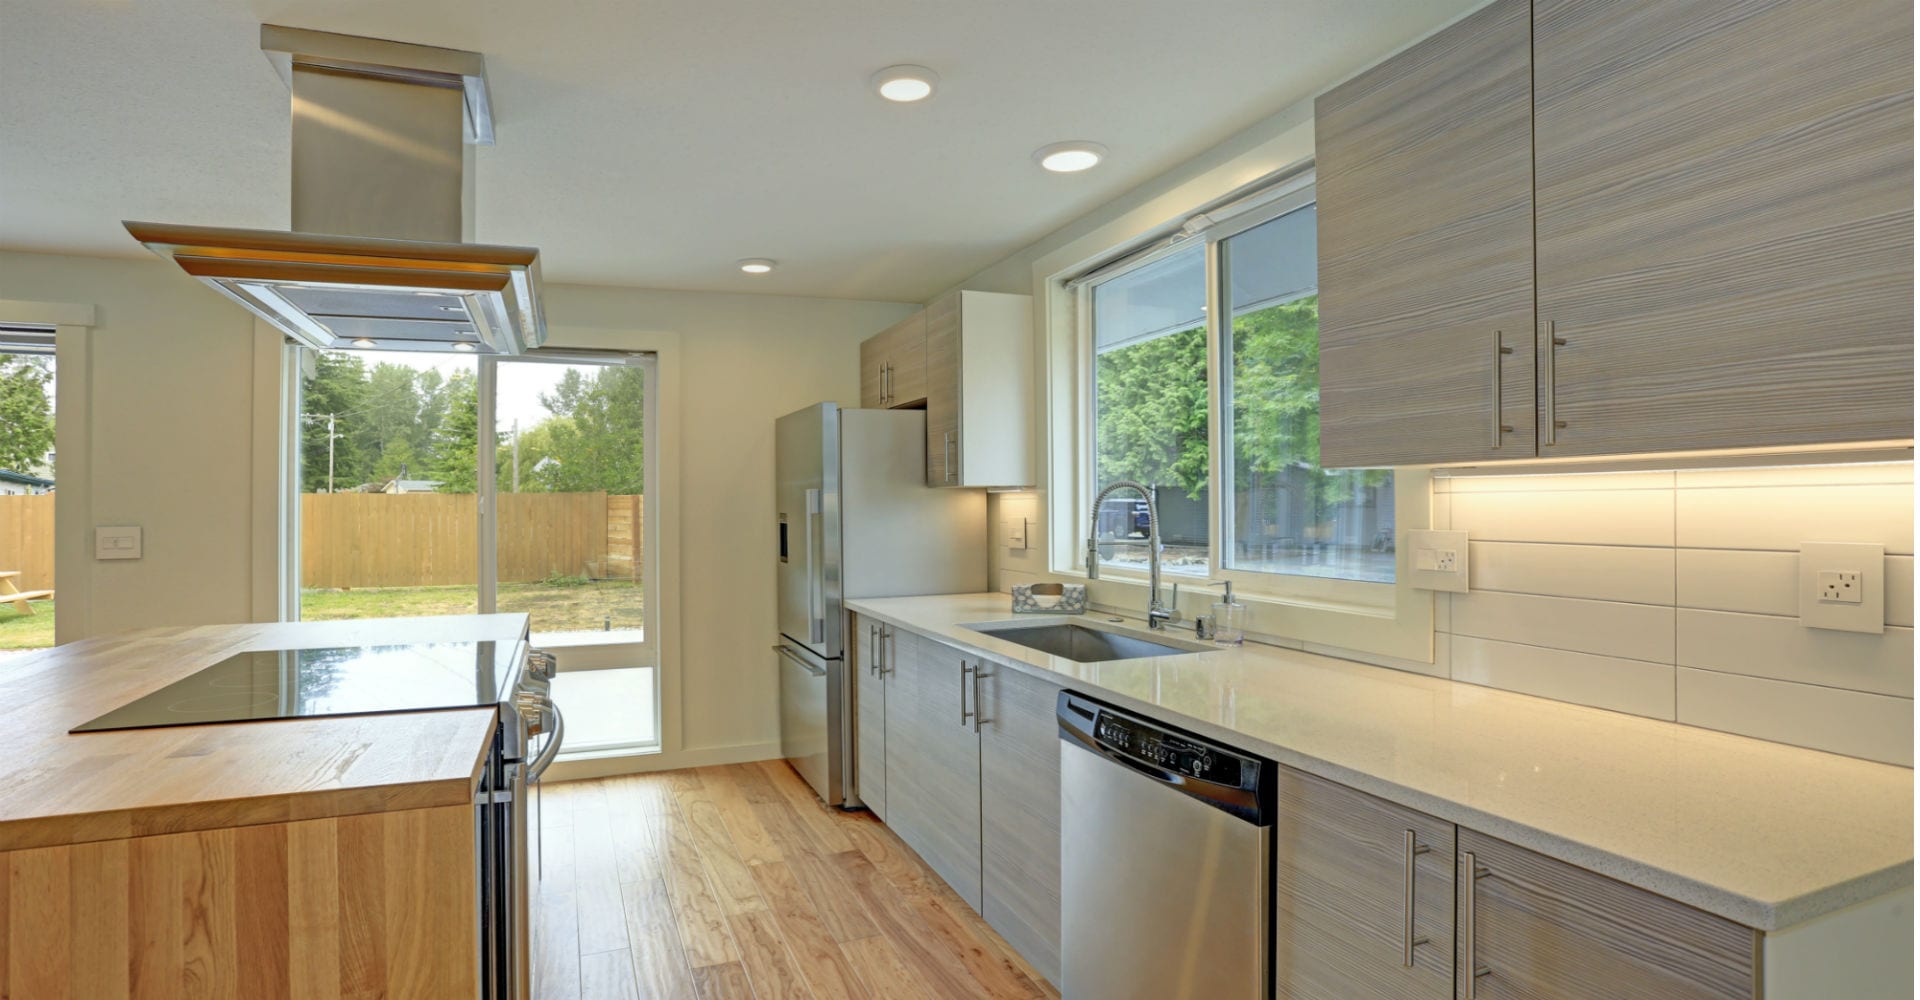 5 Things to Do Before Starting Work on Your Kitchen Remodeling Project